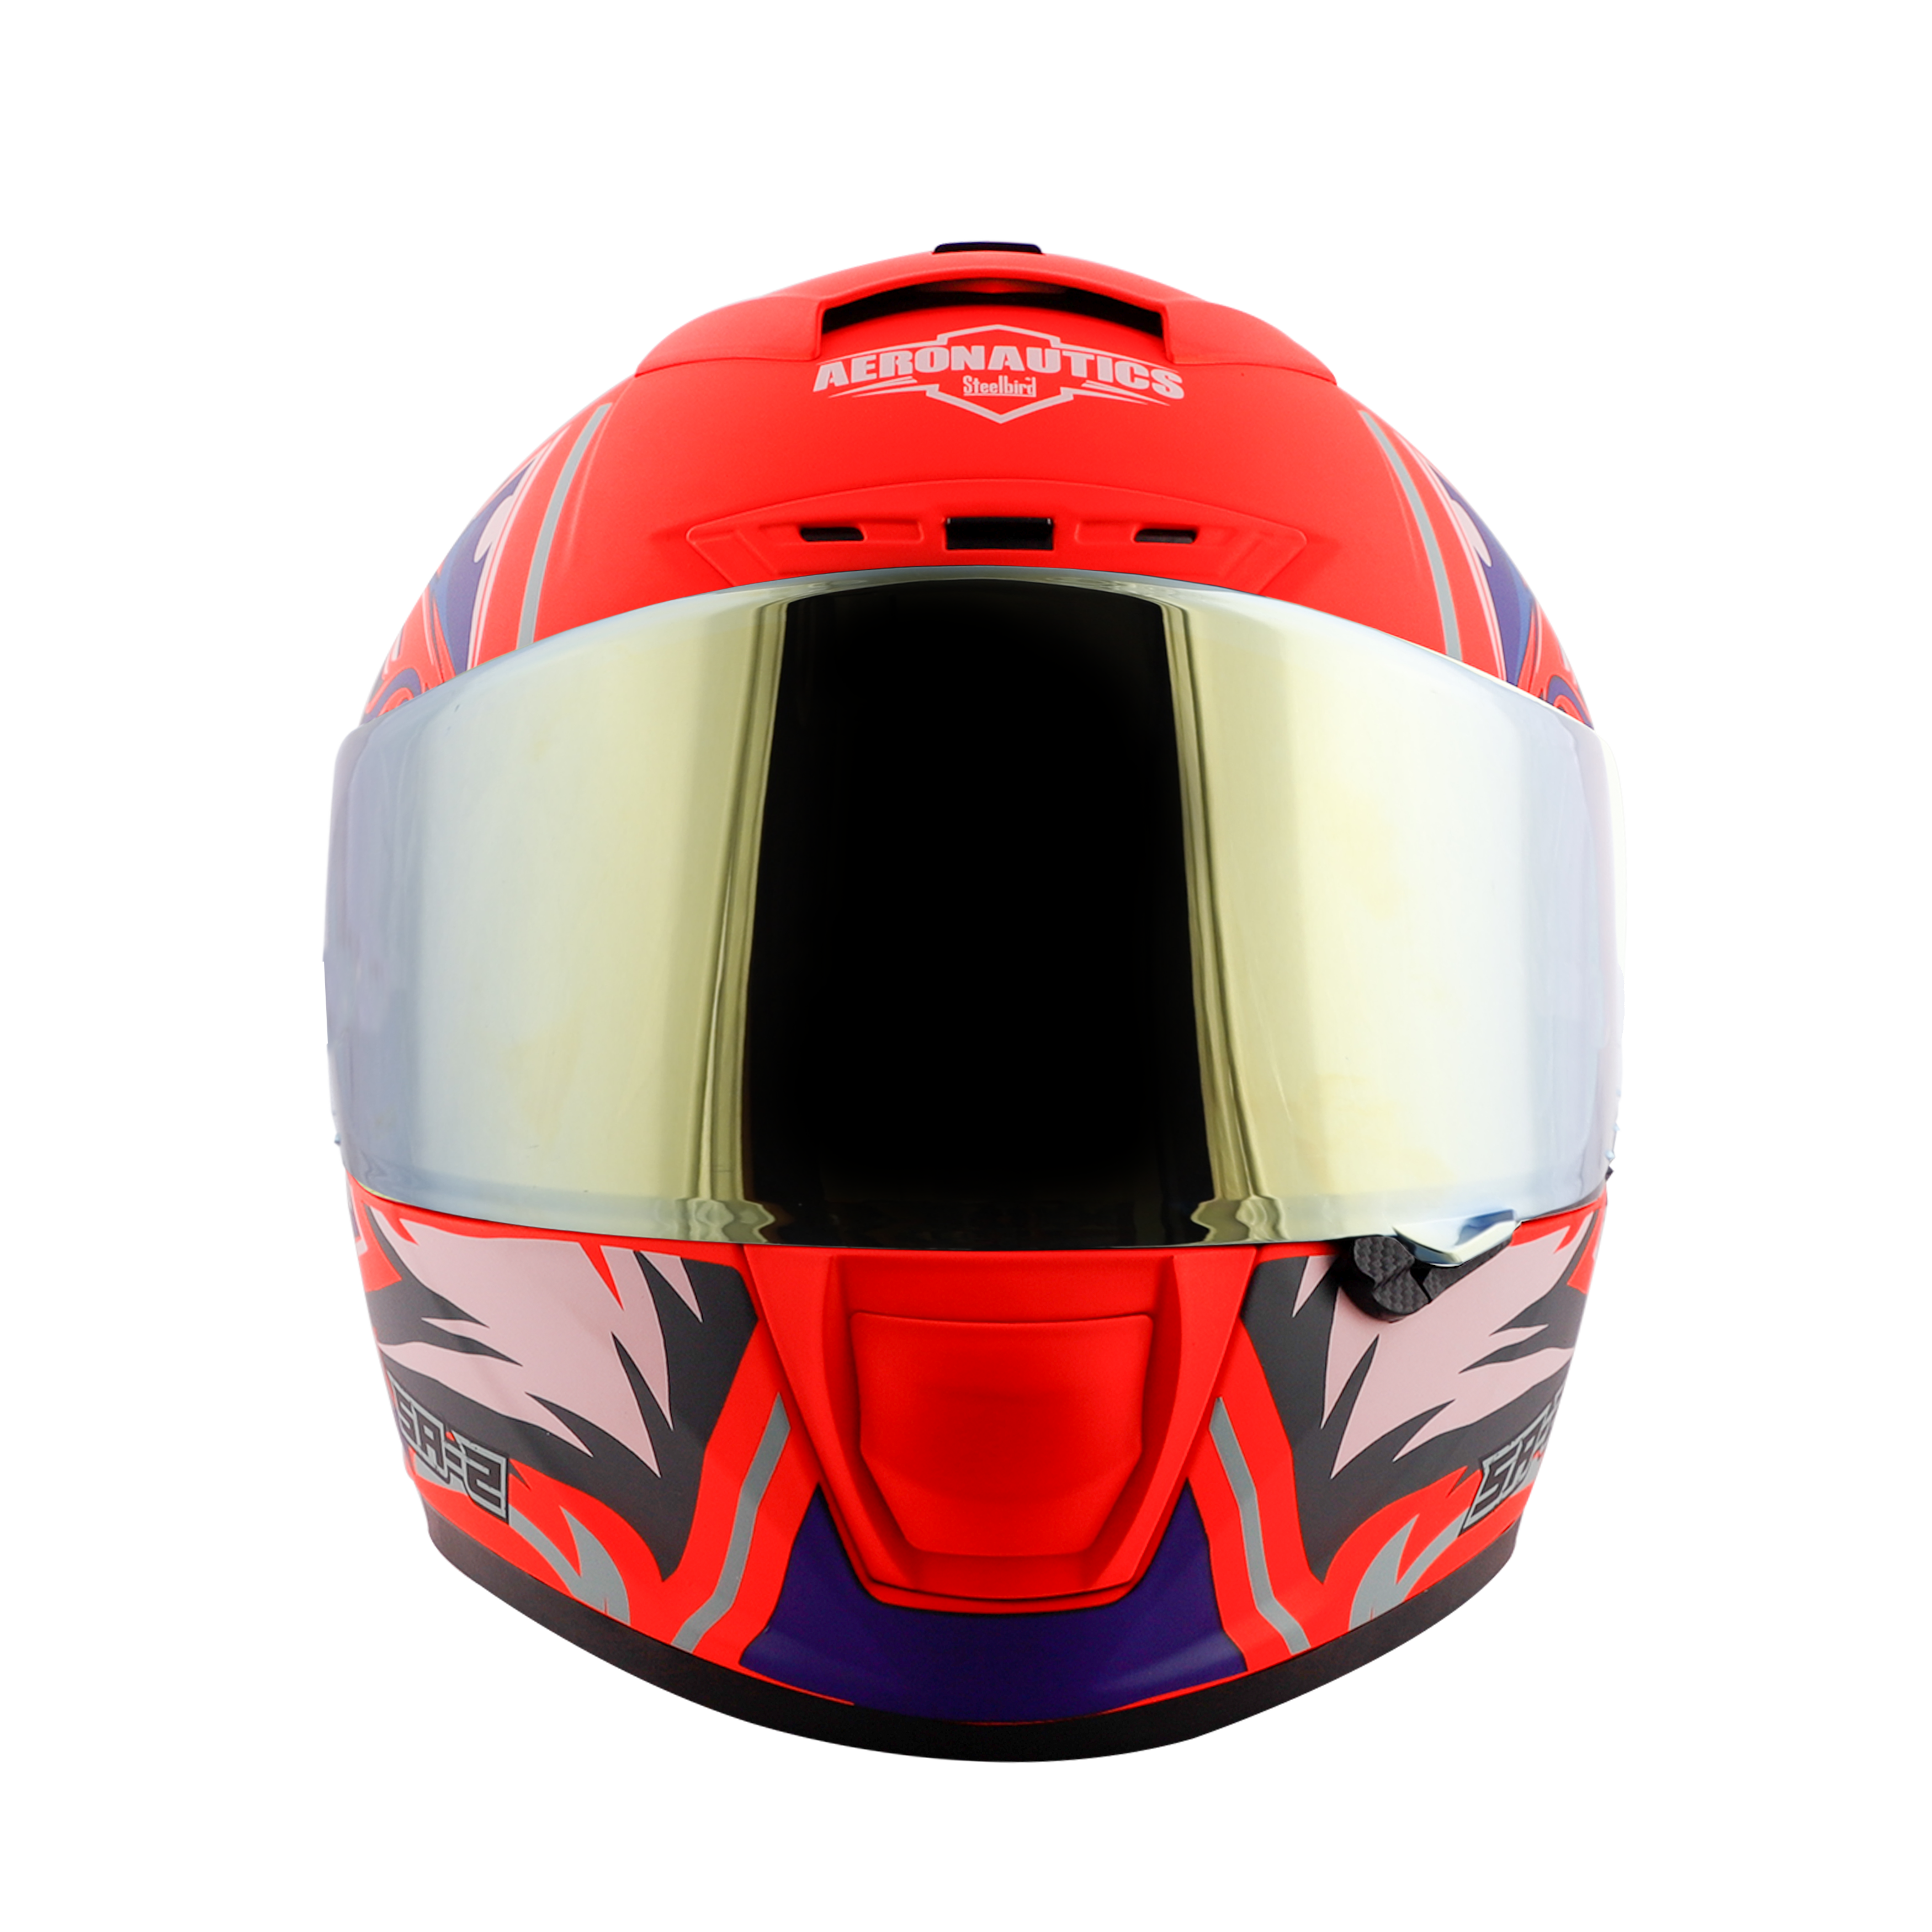 SA-2 VILLAIN GLOSSY FLUO RED WITH BLUE (FITTED WITH CLEAR VISOR EXTRA GOLD CHROME VISOR FREE)